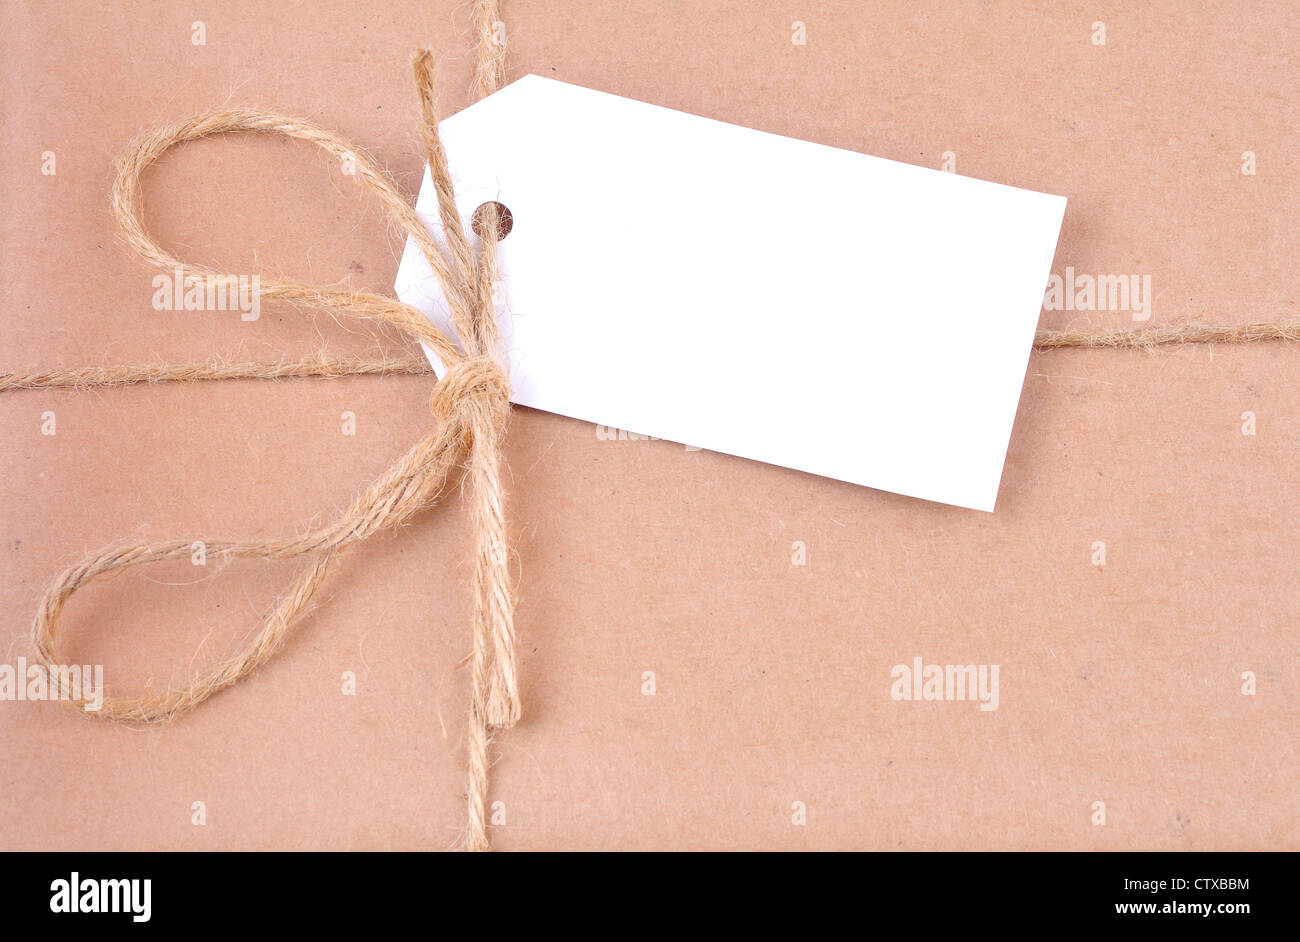 Wlhite blank label on a parcel post Stock Photo